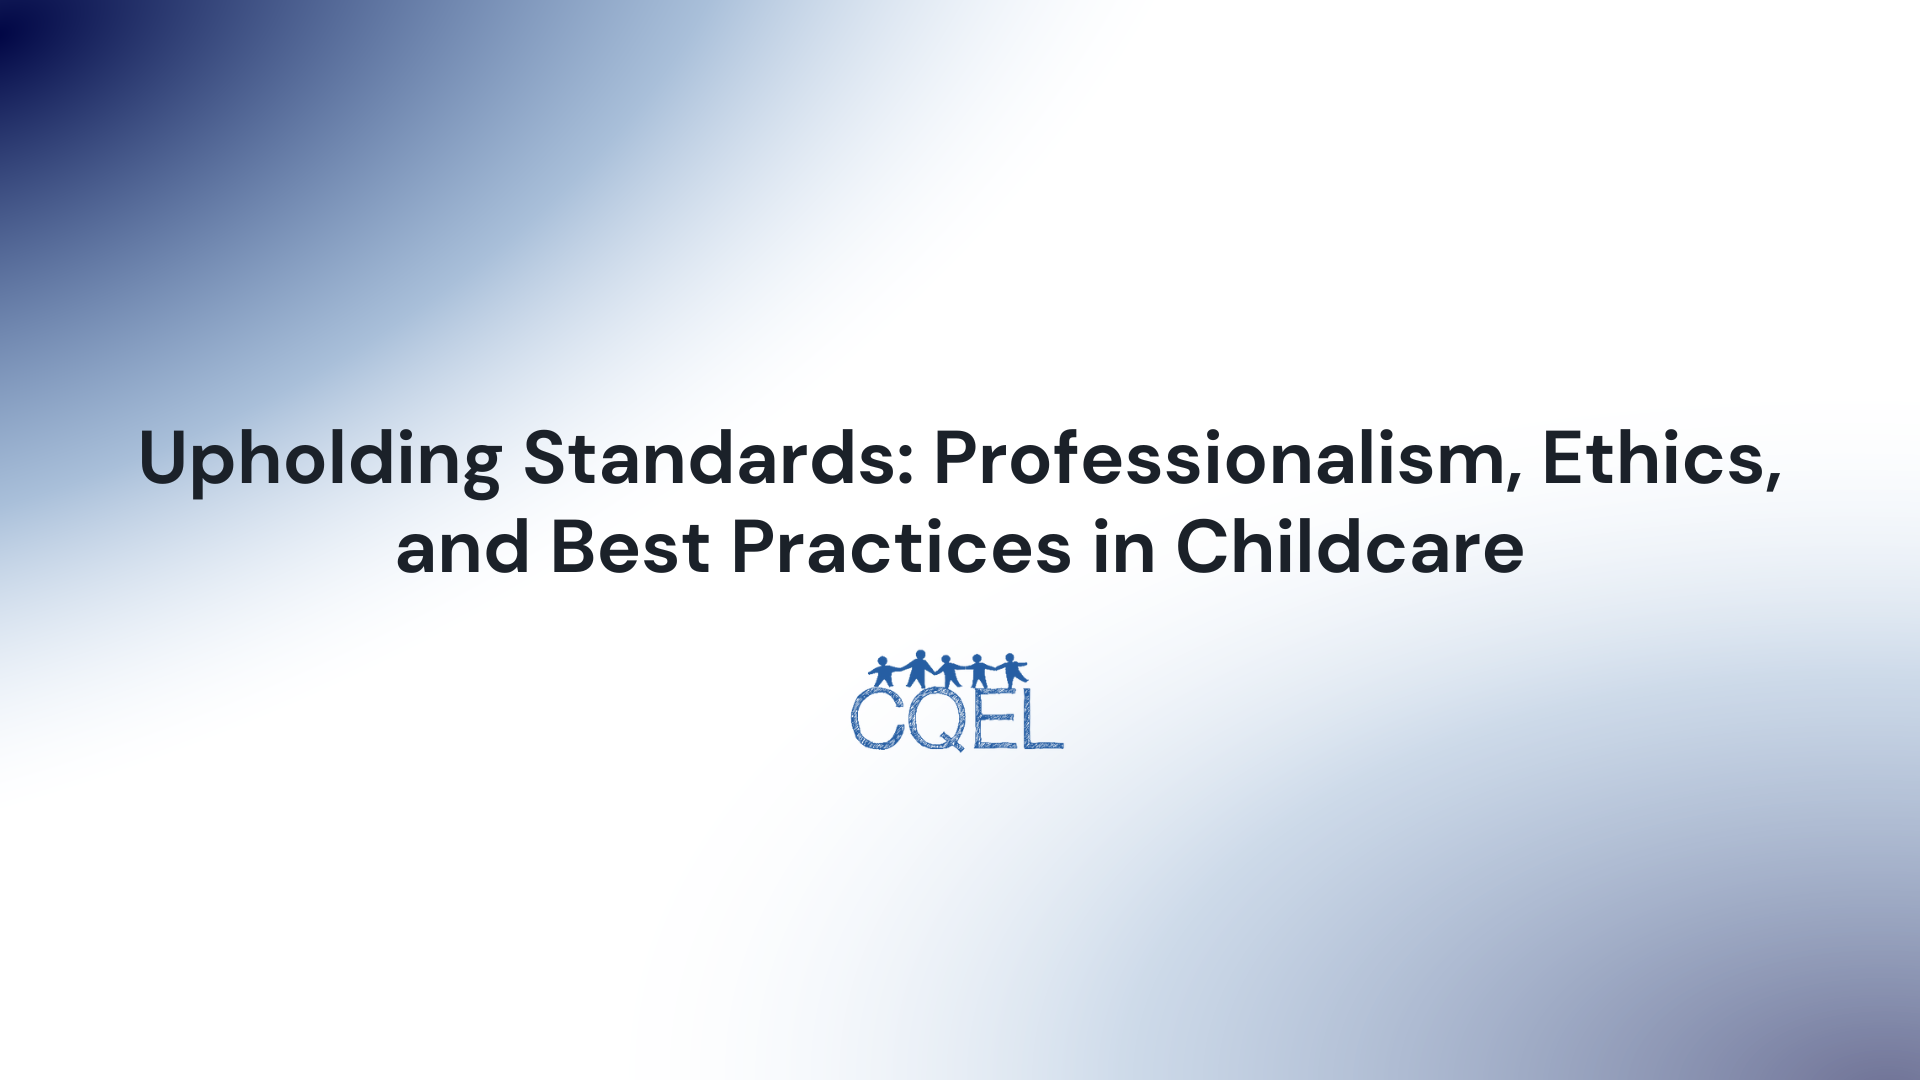 Upholding Standards: Professionalism, Ethics, and Best Practices in Childcare